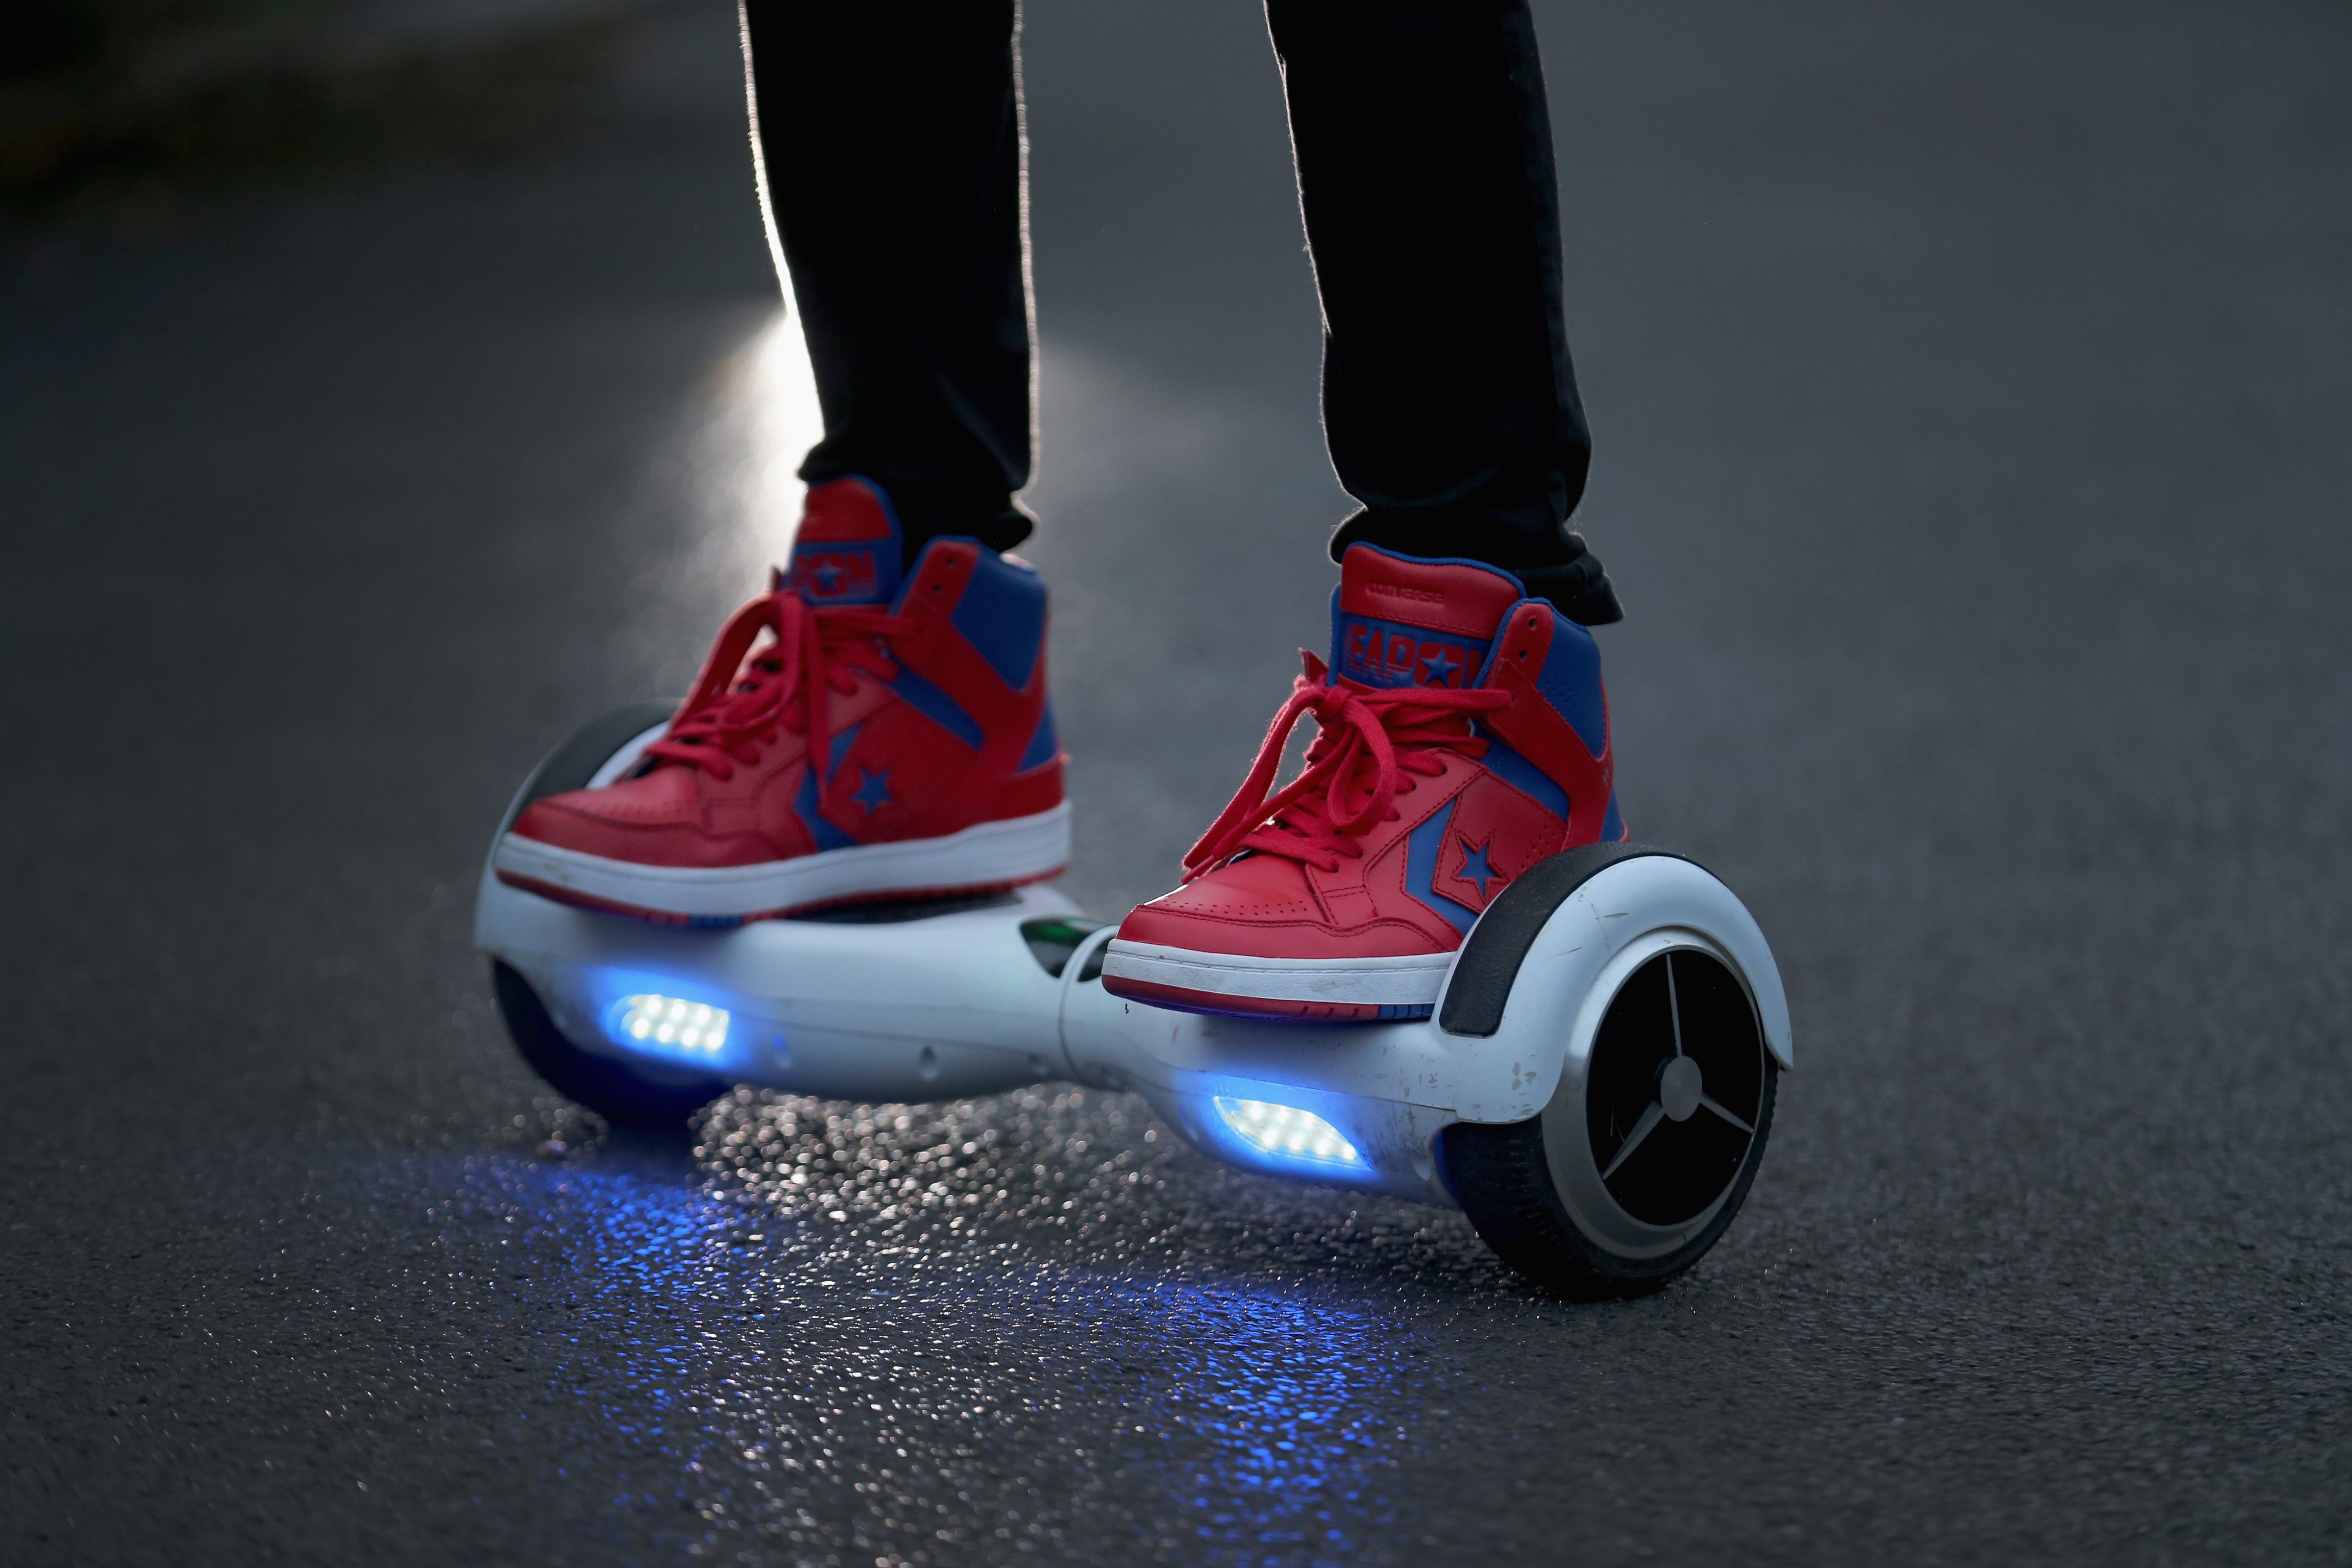 A rider on a hoverboard, which are also known as self-balancing scooters and balance boards, in Knutsford, England, Oct. 13, 2015. (Christopher Furlong—Getty Images)